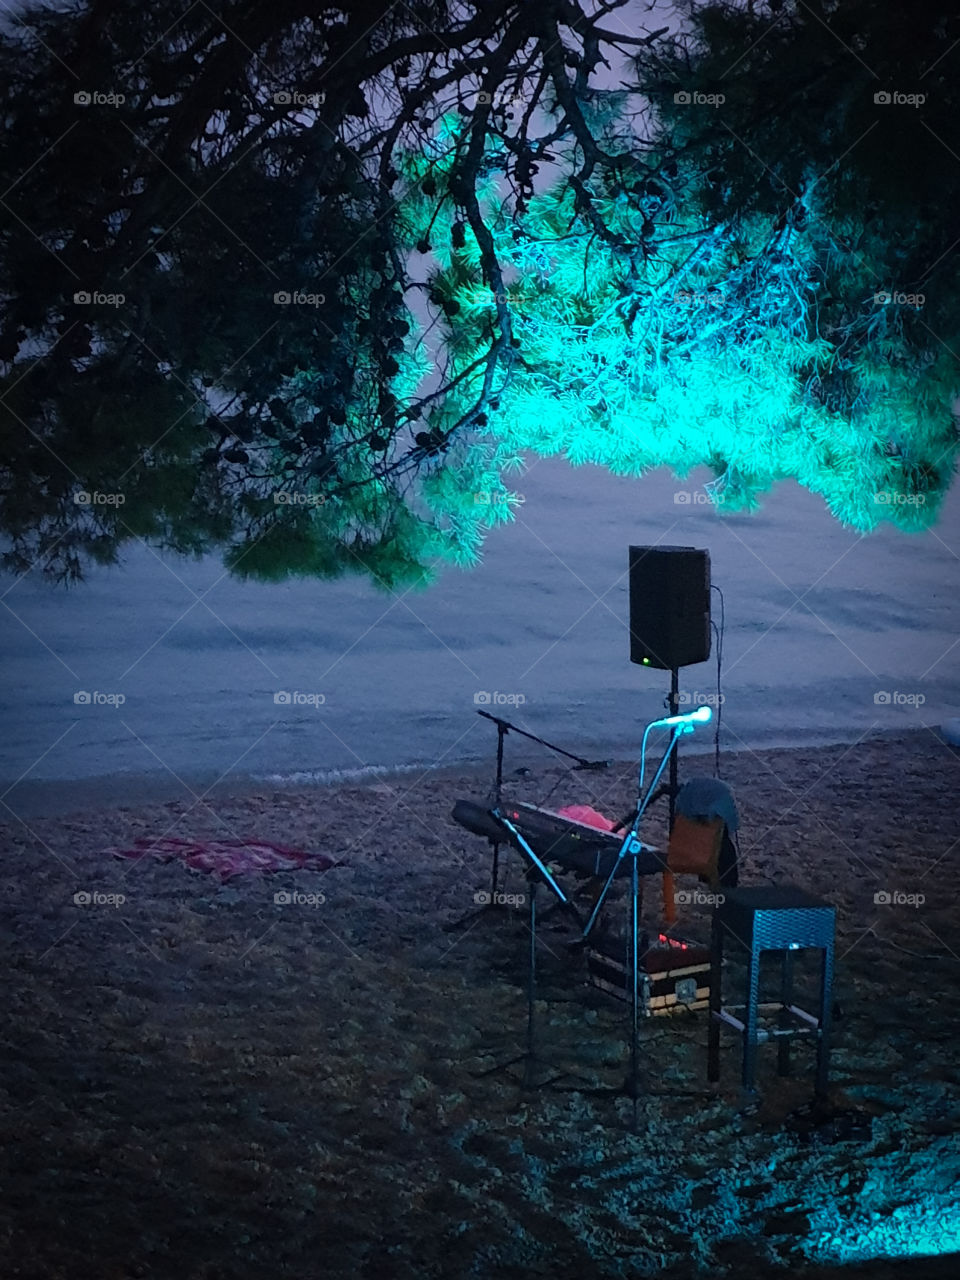 Summer evening on the warm south sea.  Preparing for the performance.  A microphone with a synthesizer and speakers standing on a pebble beach under pine trees with backlight